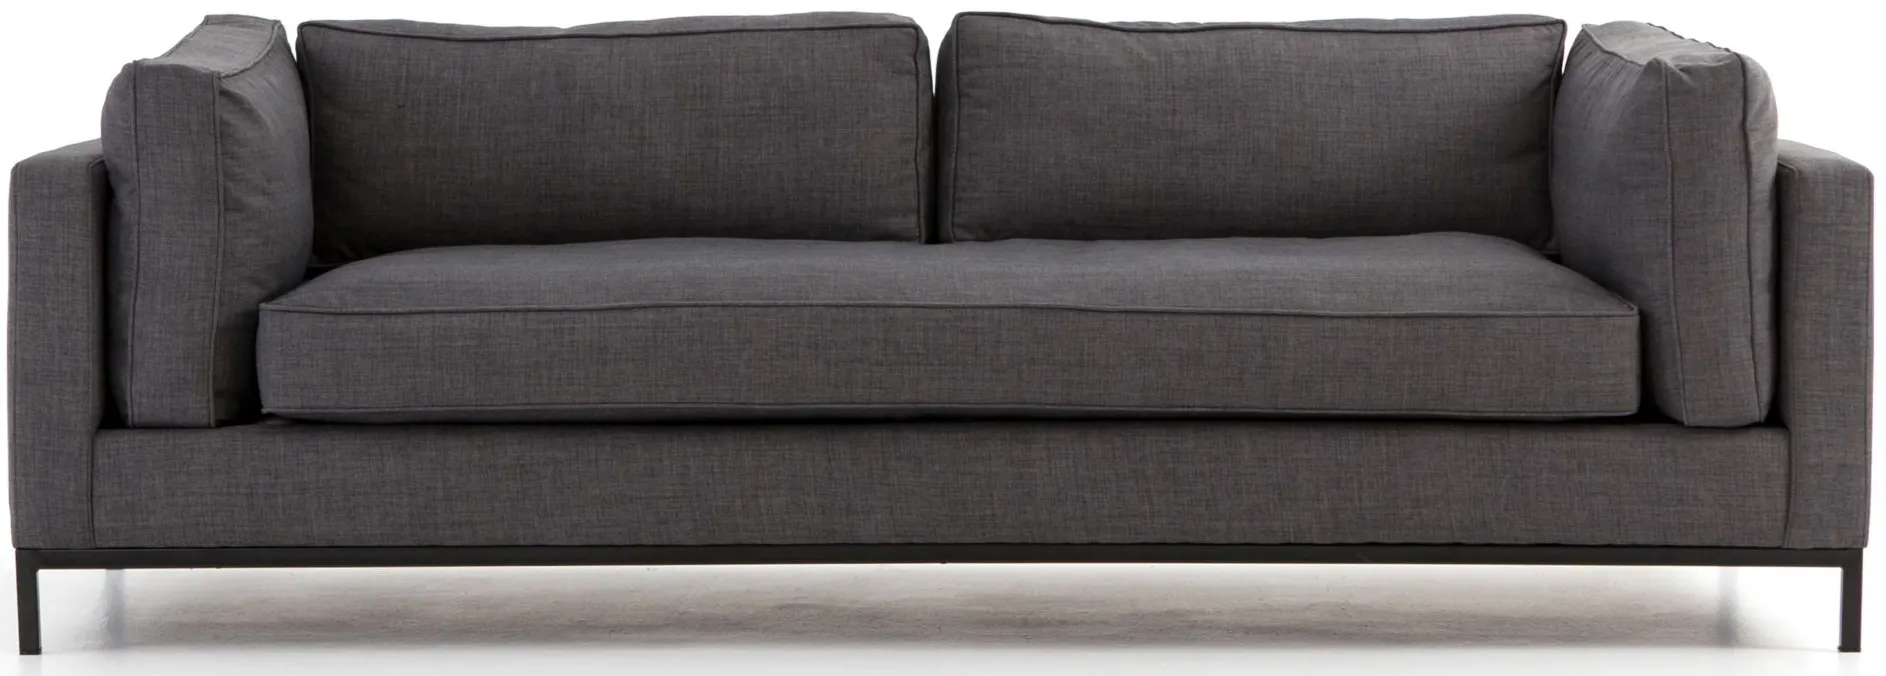 DuPar Sofa in Bennett Charcoal by Four Hands